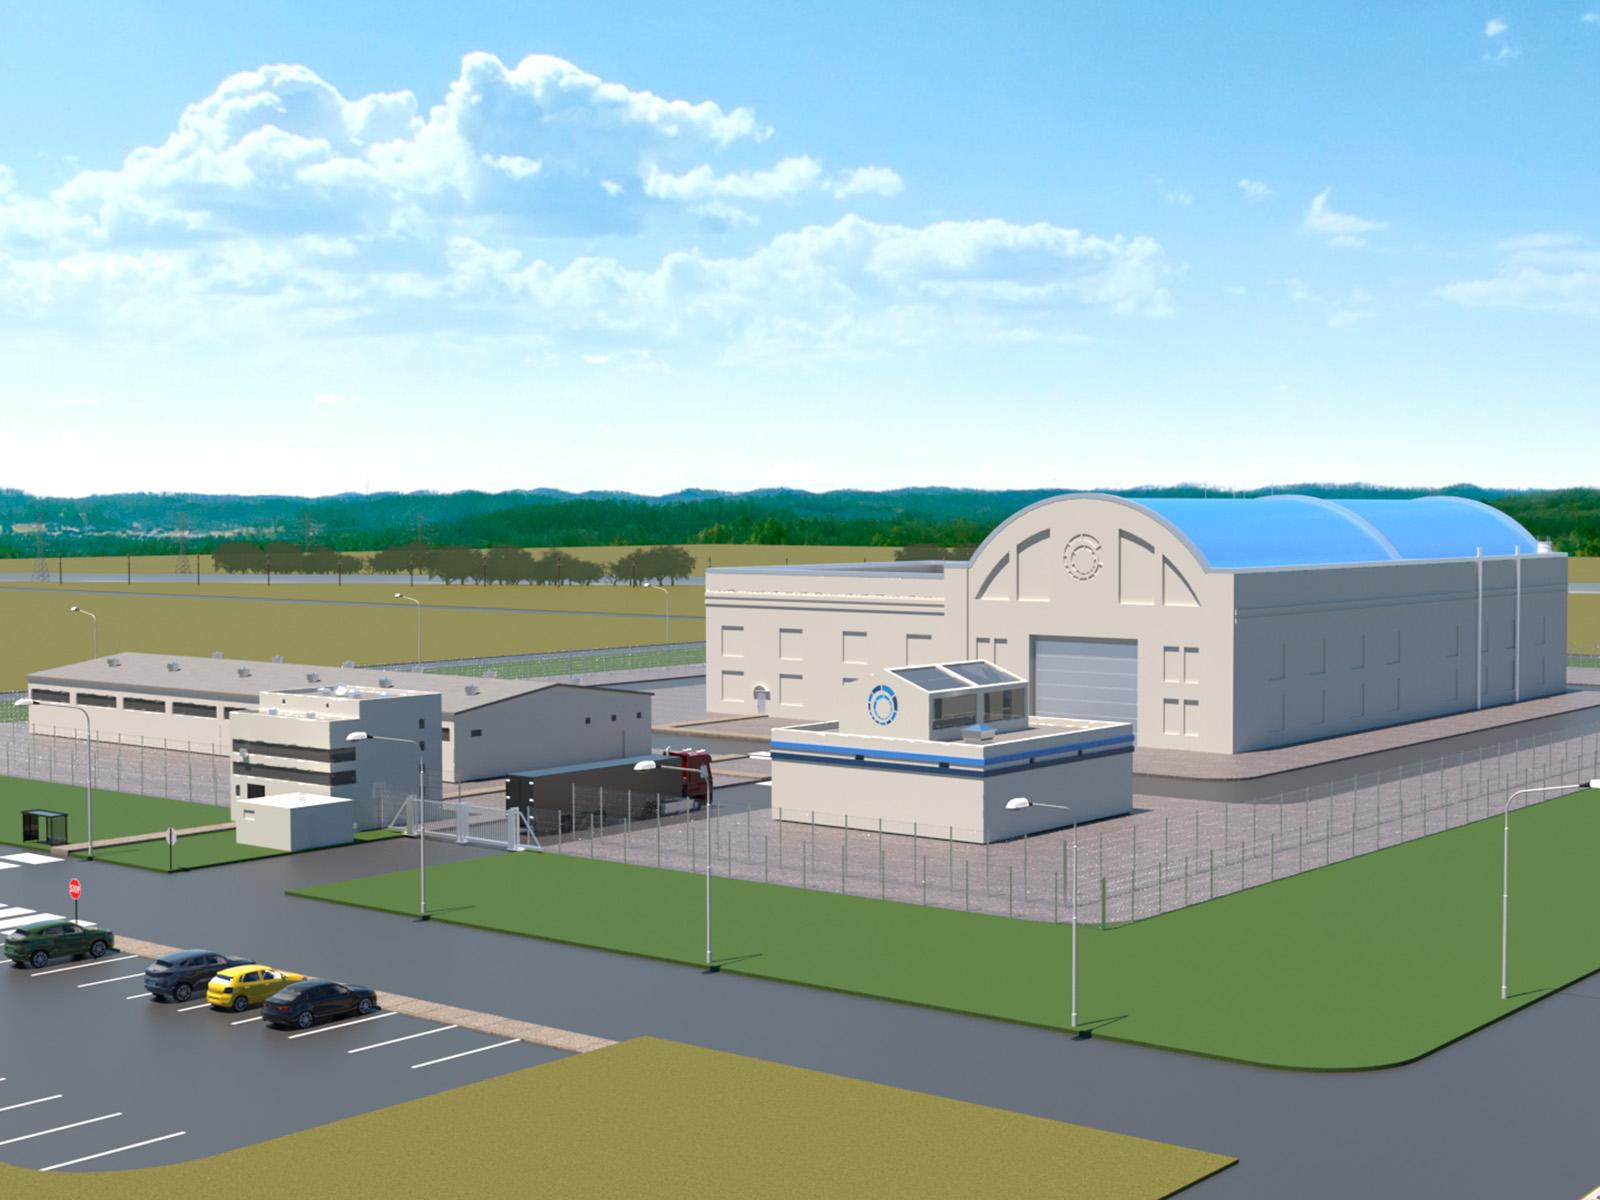 Artist's rendering of a big building with a rounded top that will house the Hermes test reactor.